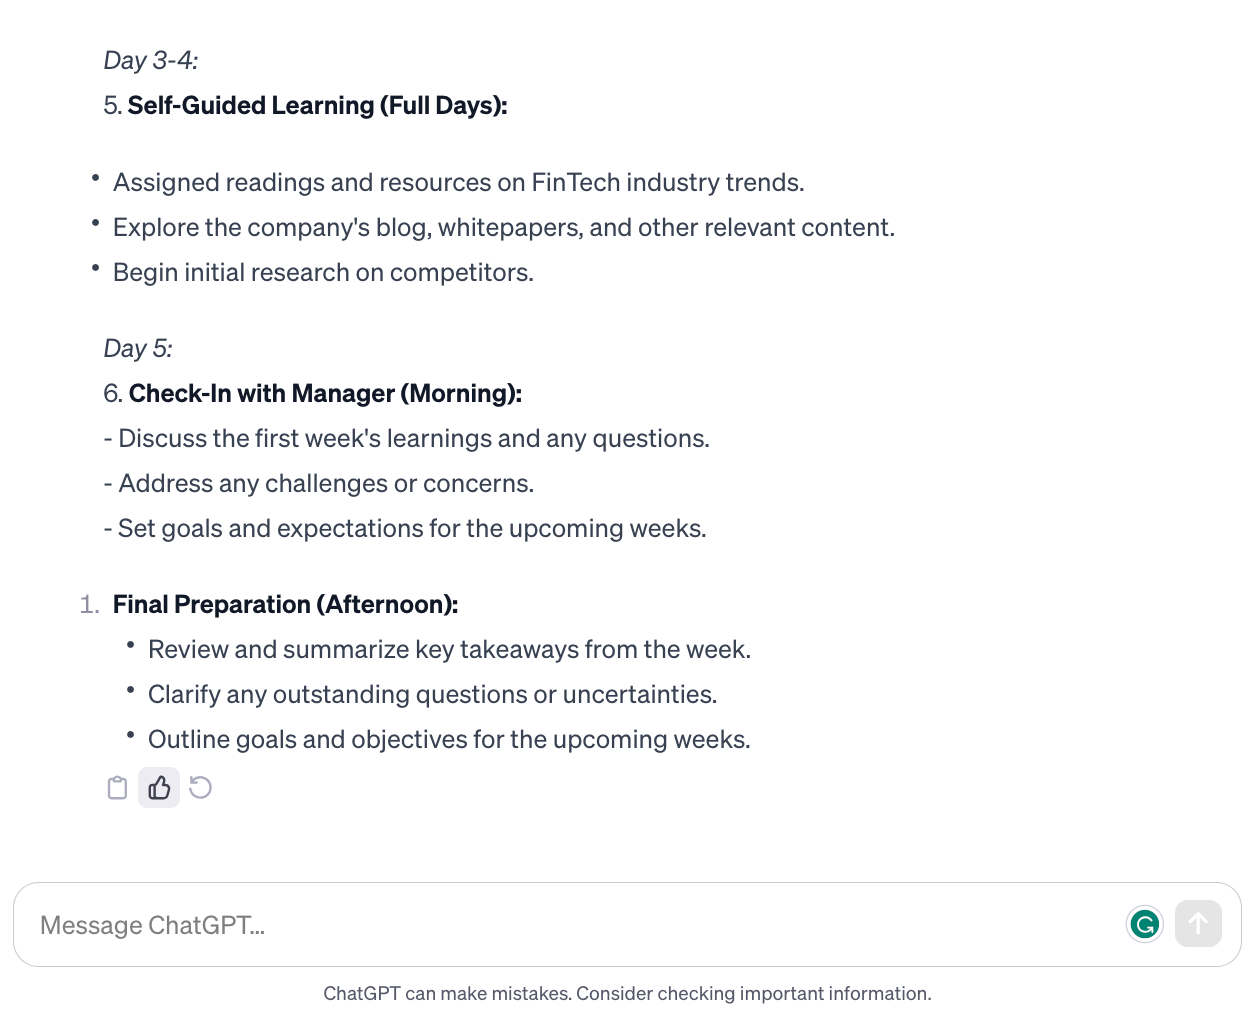 An onboarding plan for new content marketing managers starting at a FinTech company, generated by ChatGPT.